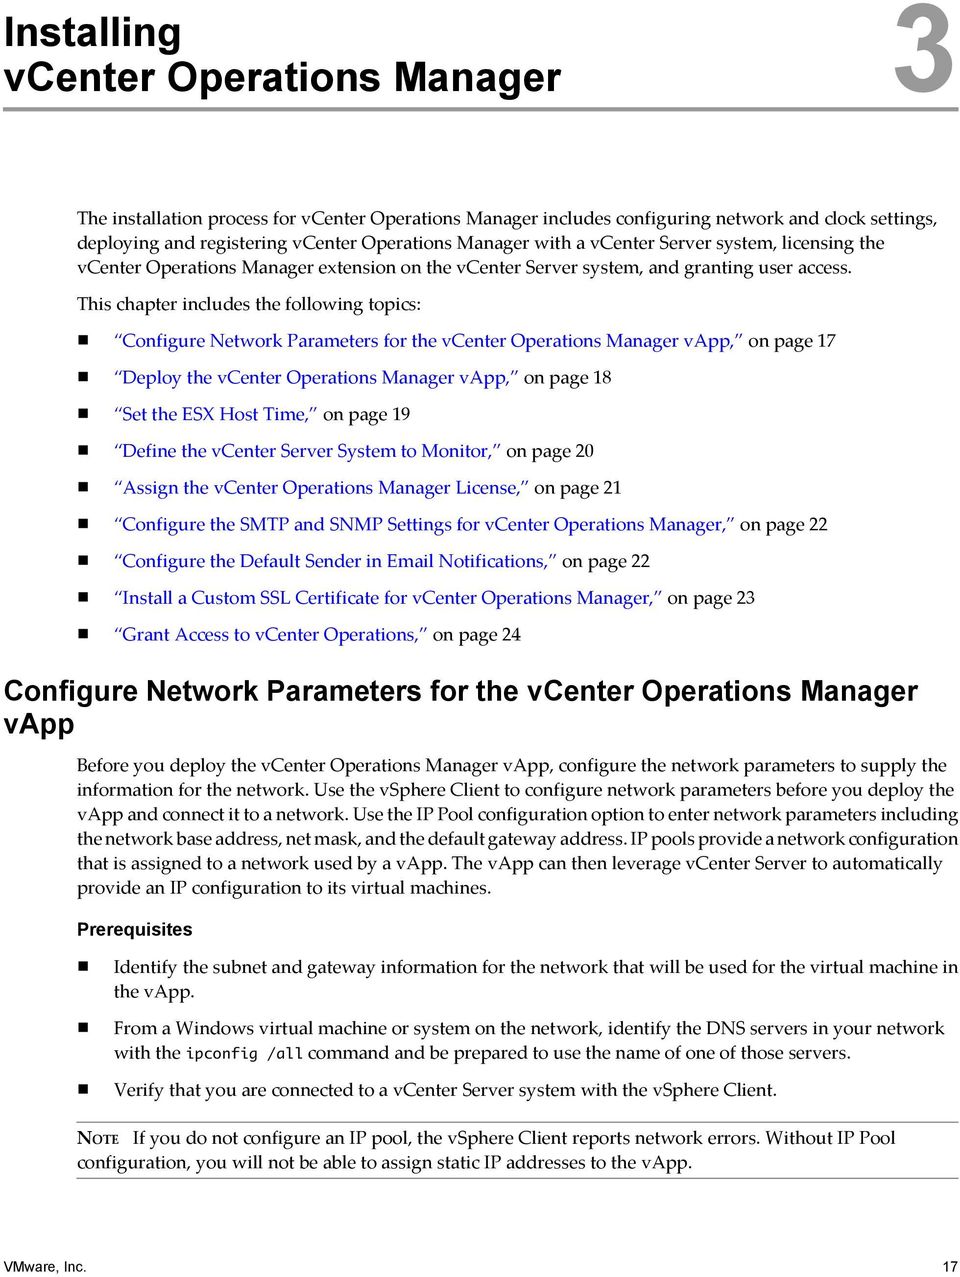 This chapter includes the following topics: Configure Network Parameters for the vcenter Operations Manager vapp, on page 17 Deploy the vcenter Operations Manager vapp, on page 18 Set the ESX Host